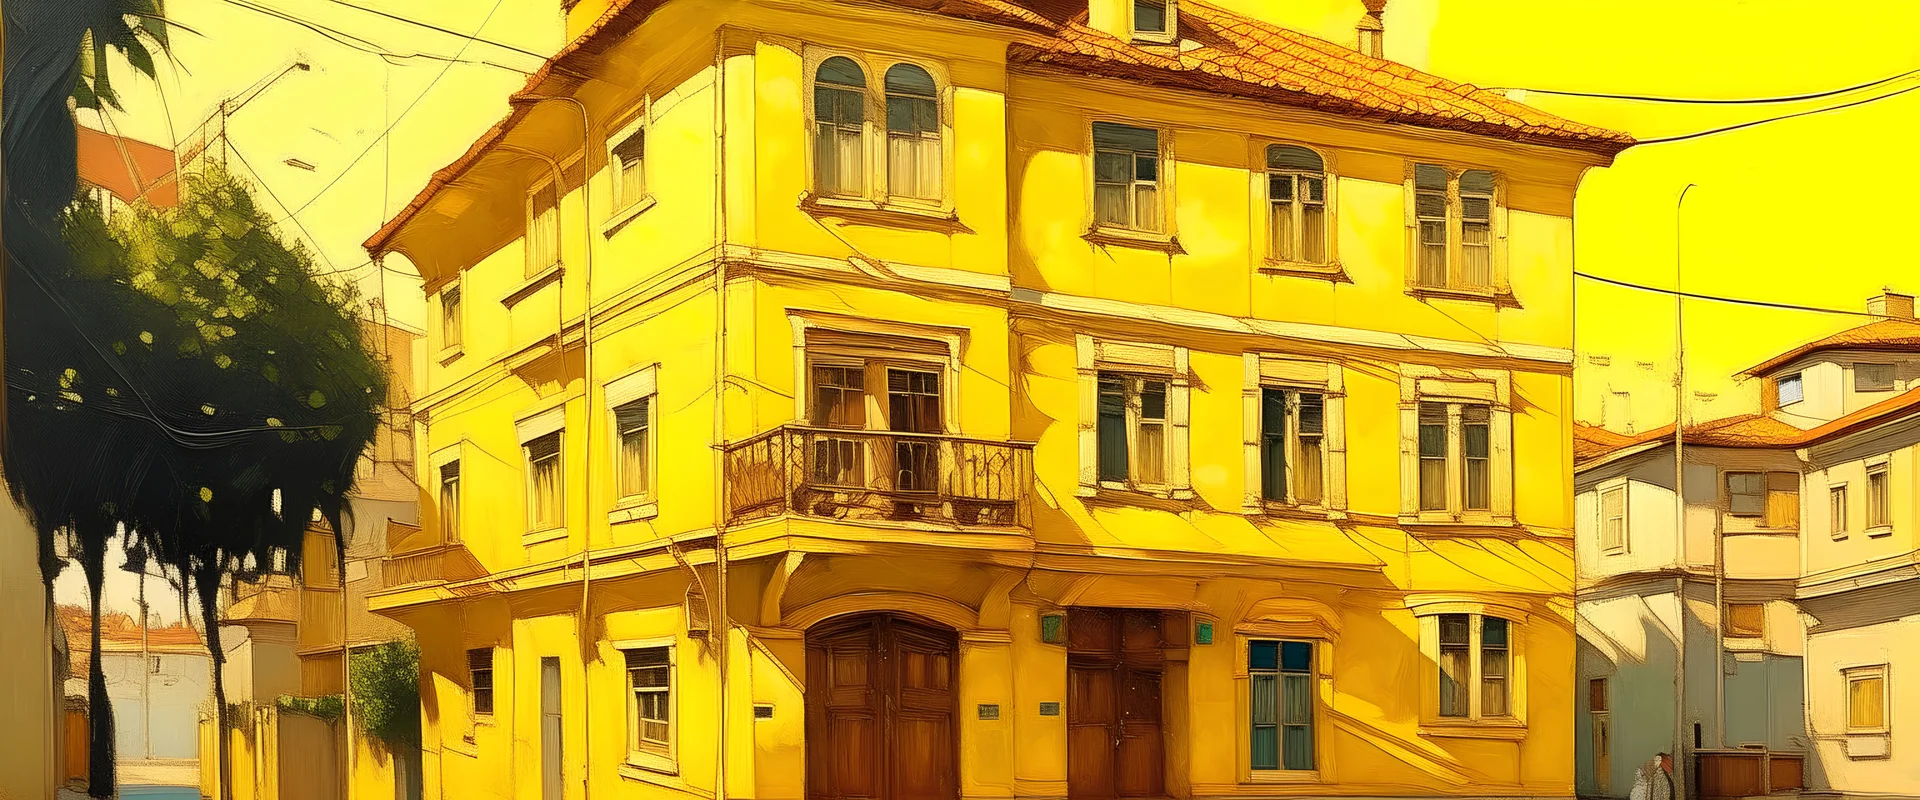 A yellow house in a metropolis in daylight painted by Zosan